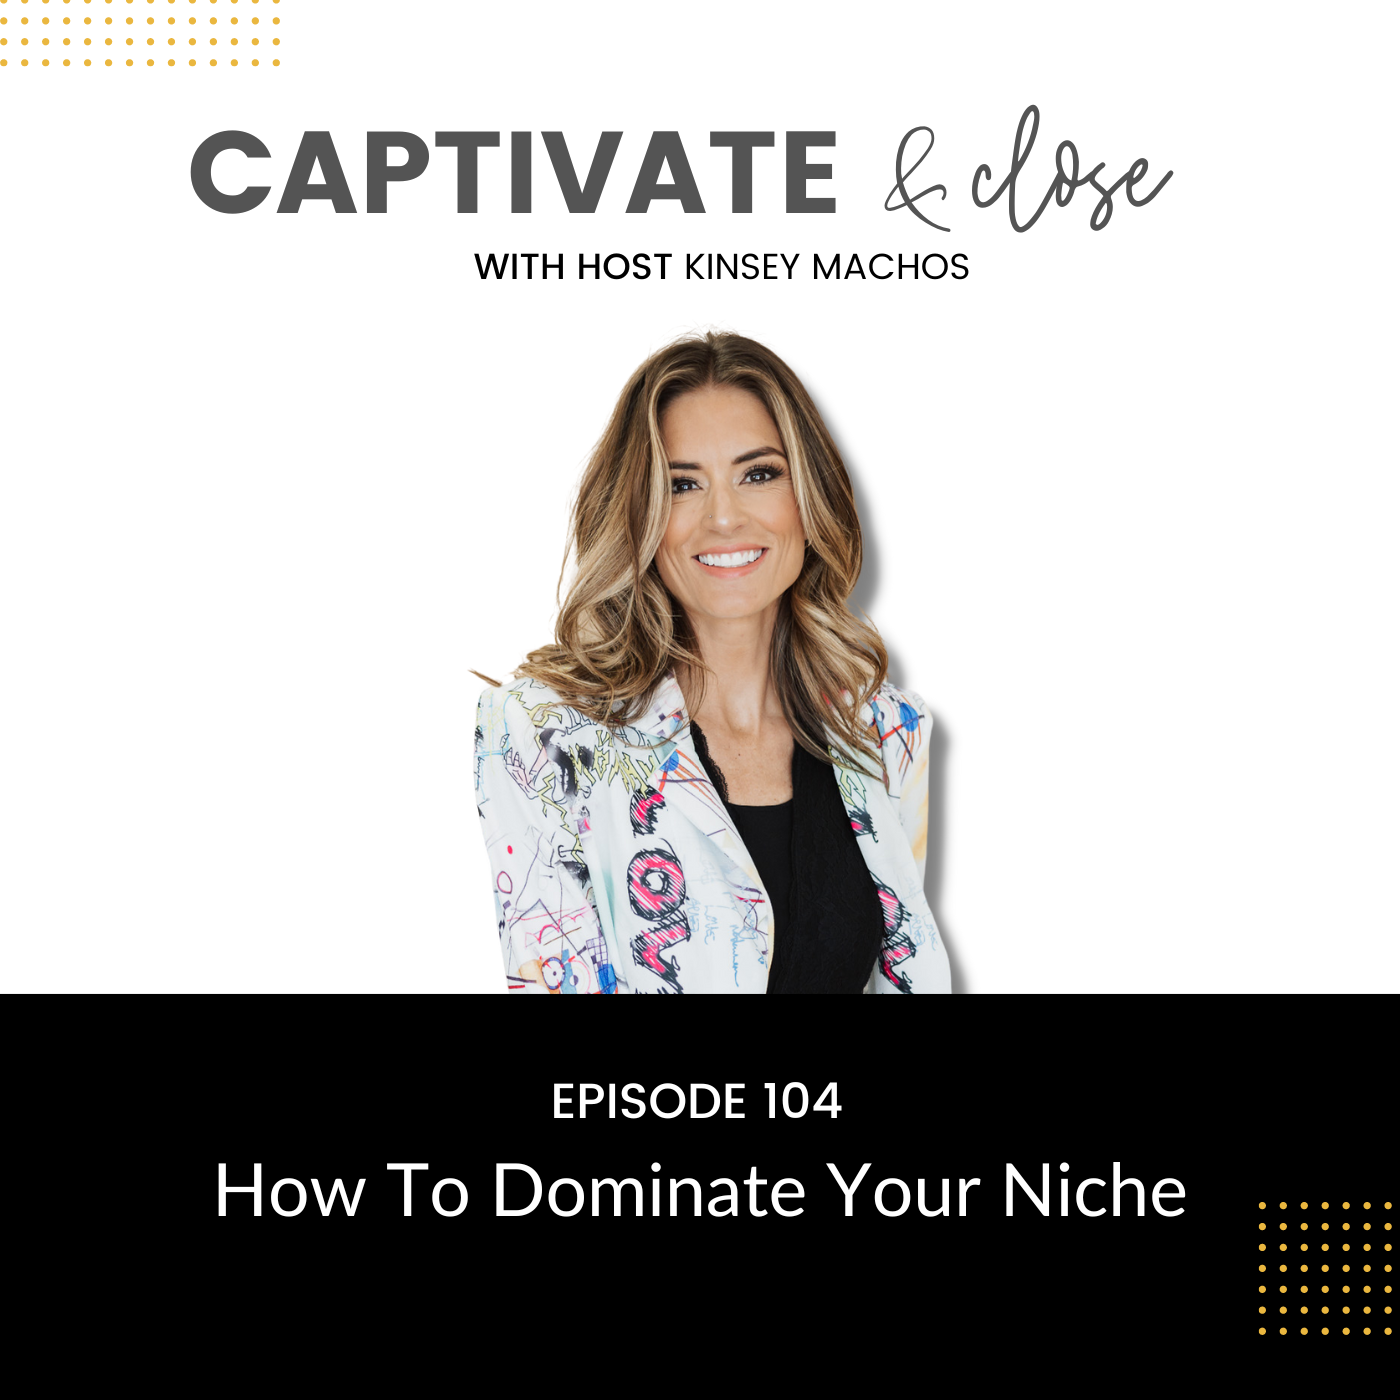 How To Dominate Your Niche